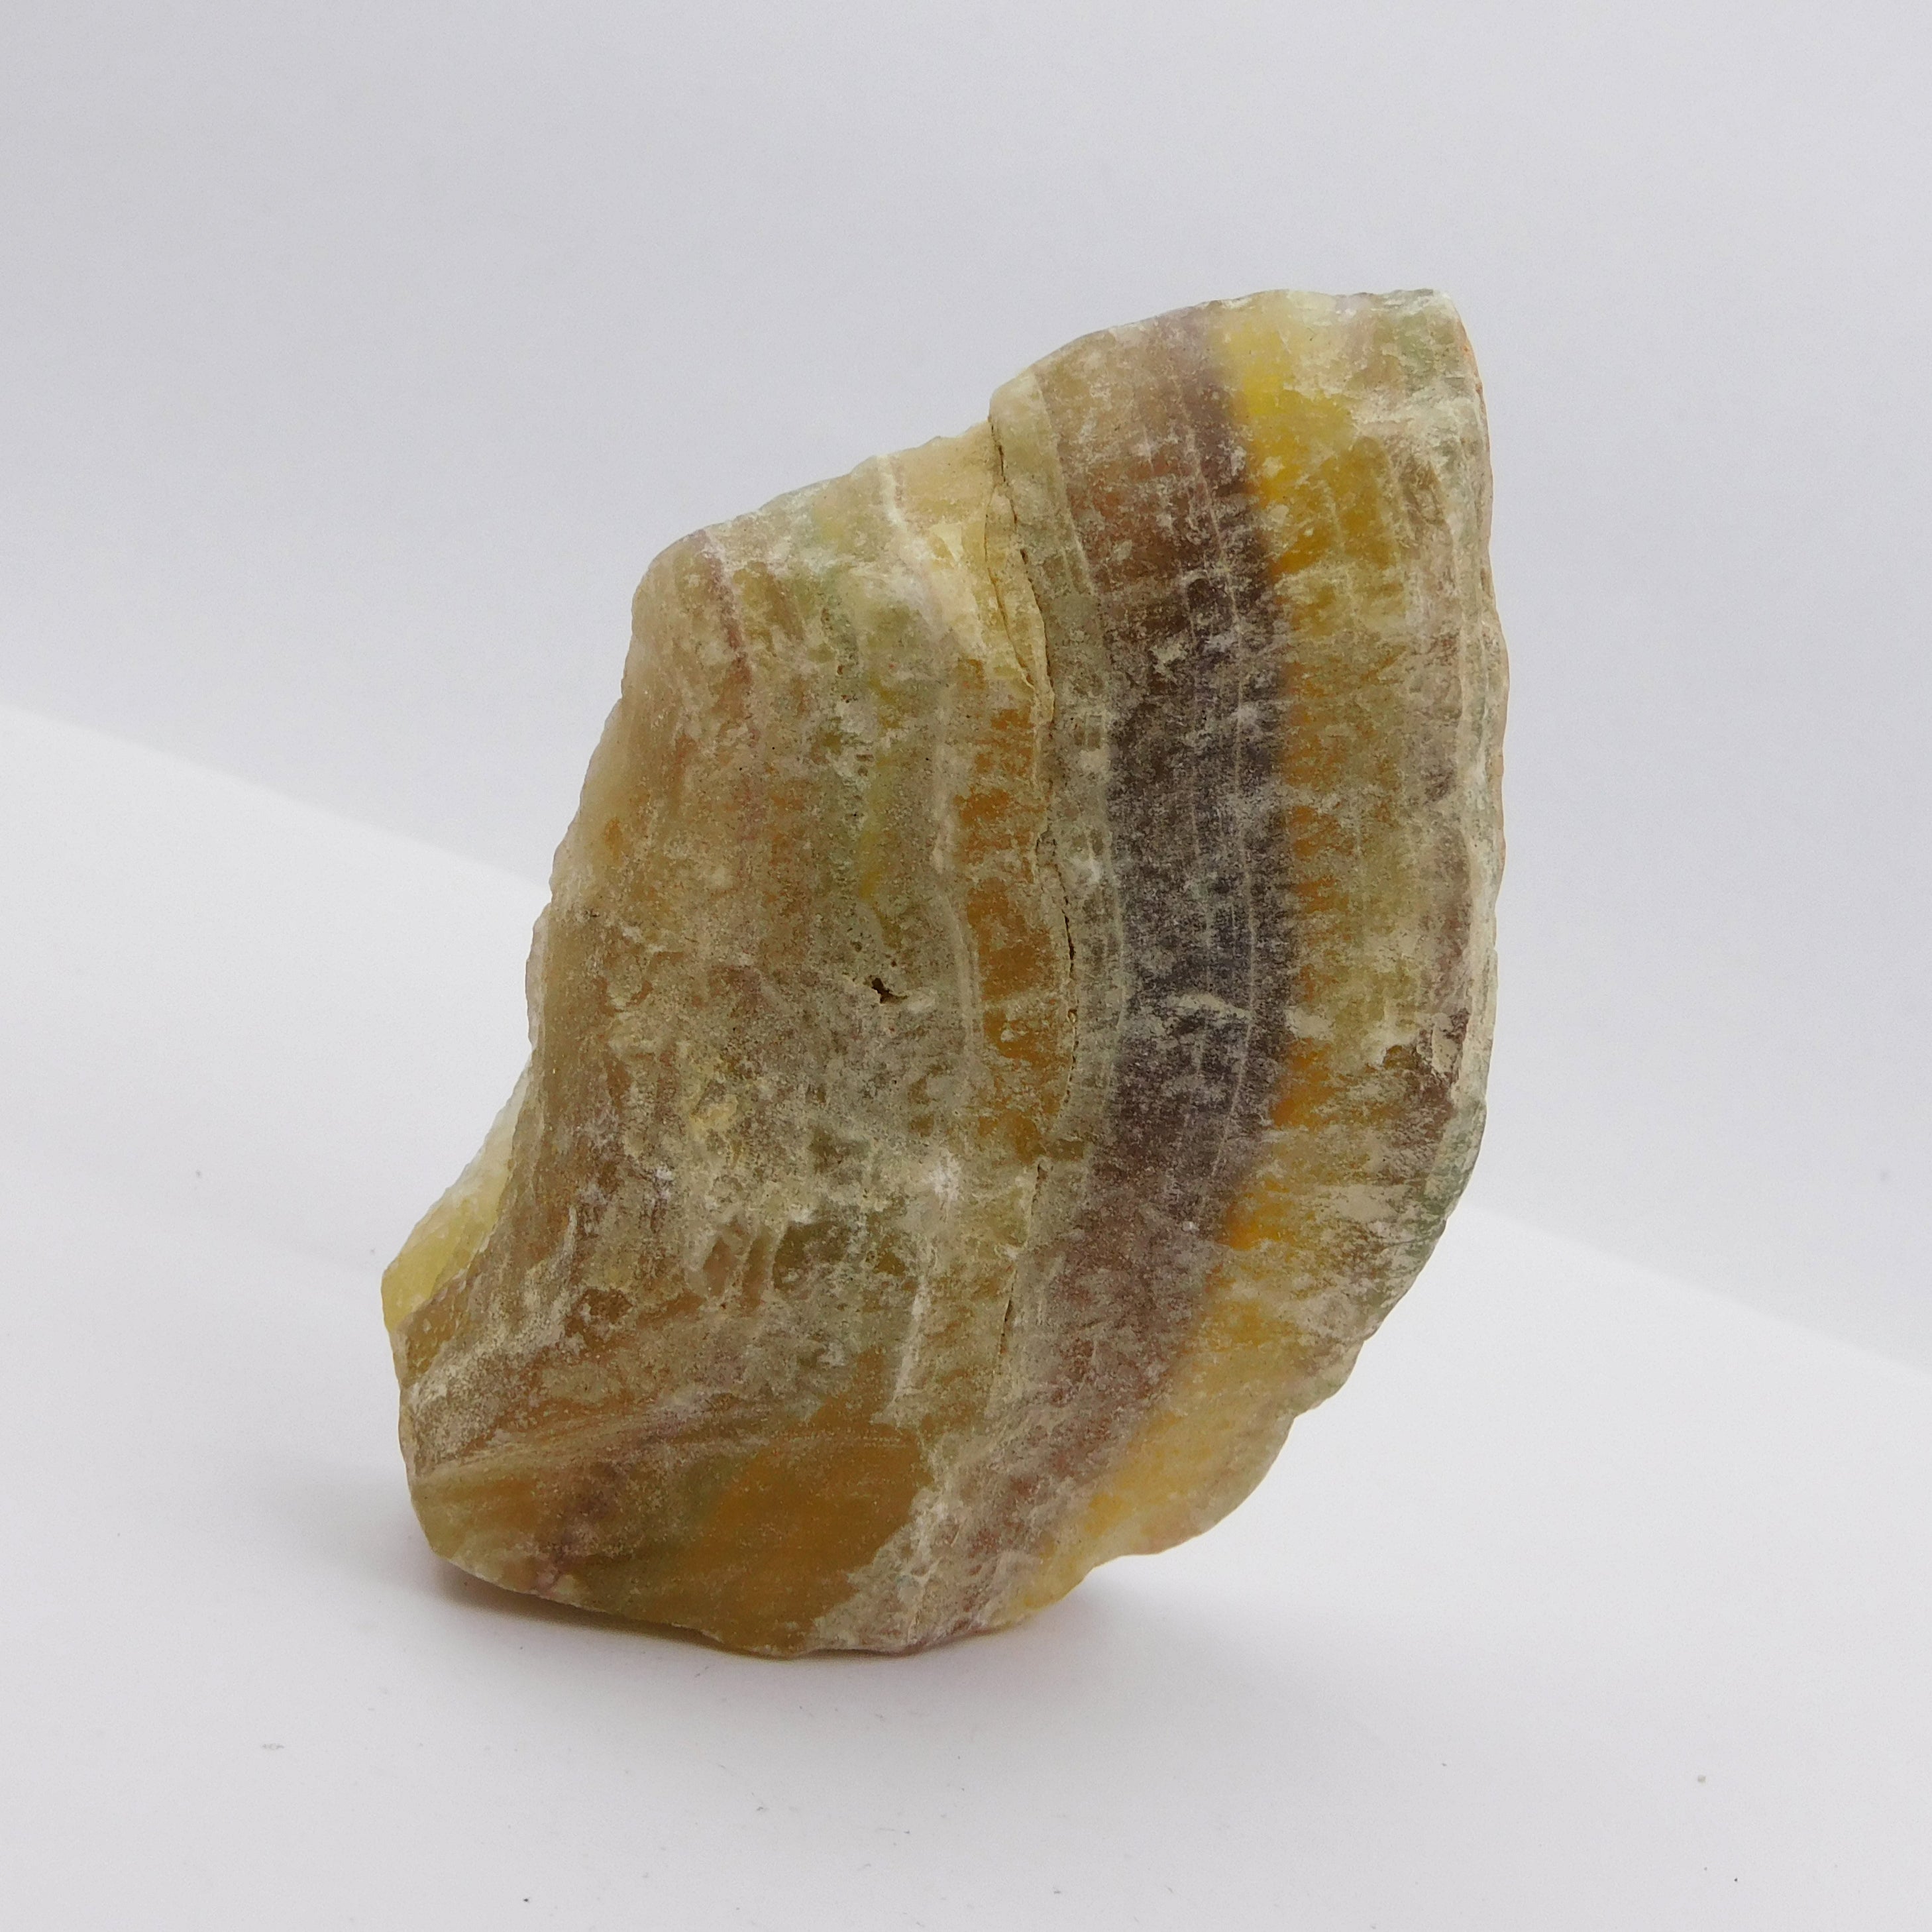 488.35 Carat Yellow Uncut Natural Tiger Eye Raw Rough CERTIFIED Loose Gemstone Rough Huge Surprising Certified Excellence Quality Rocks and Minerals Loose Gems